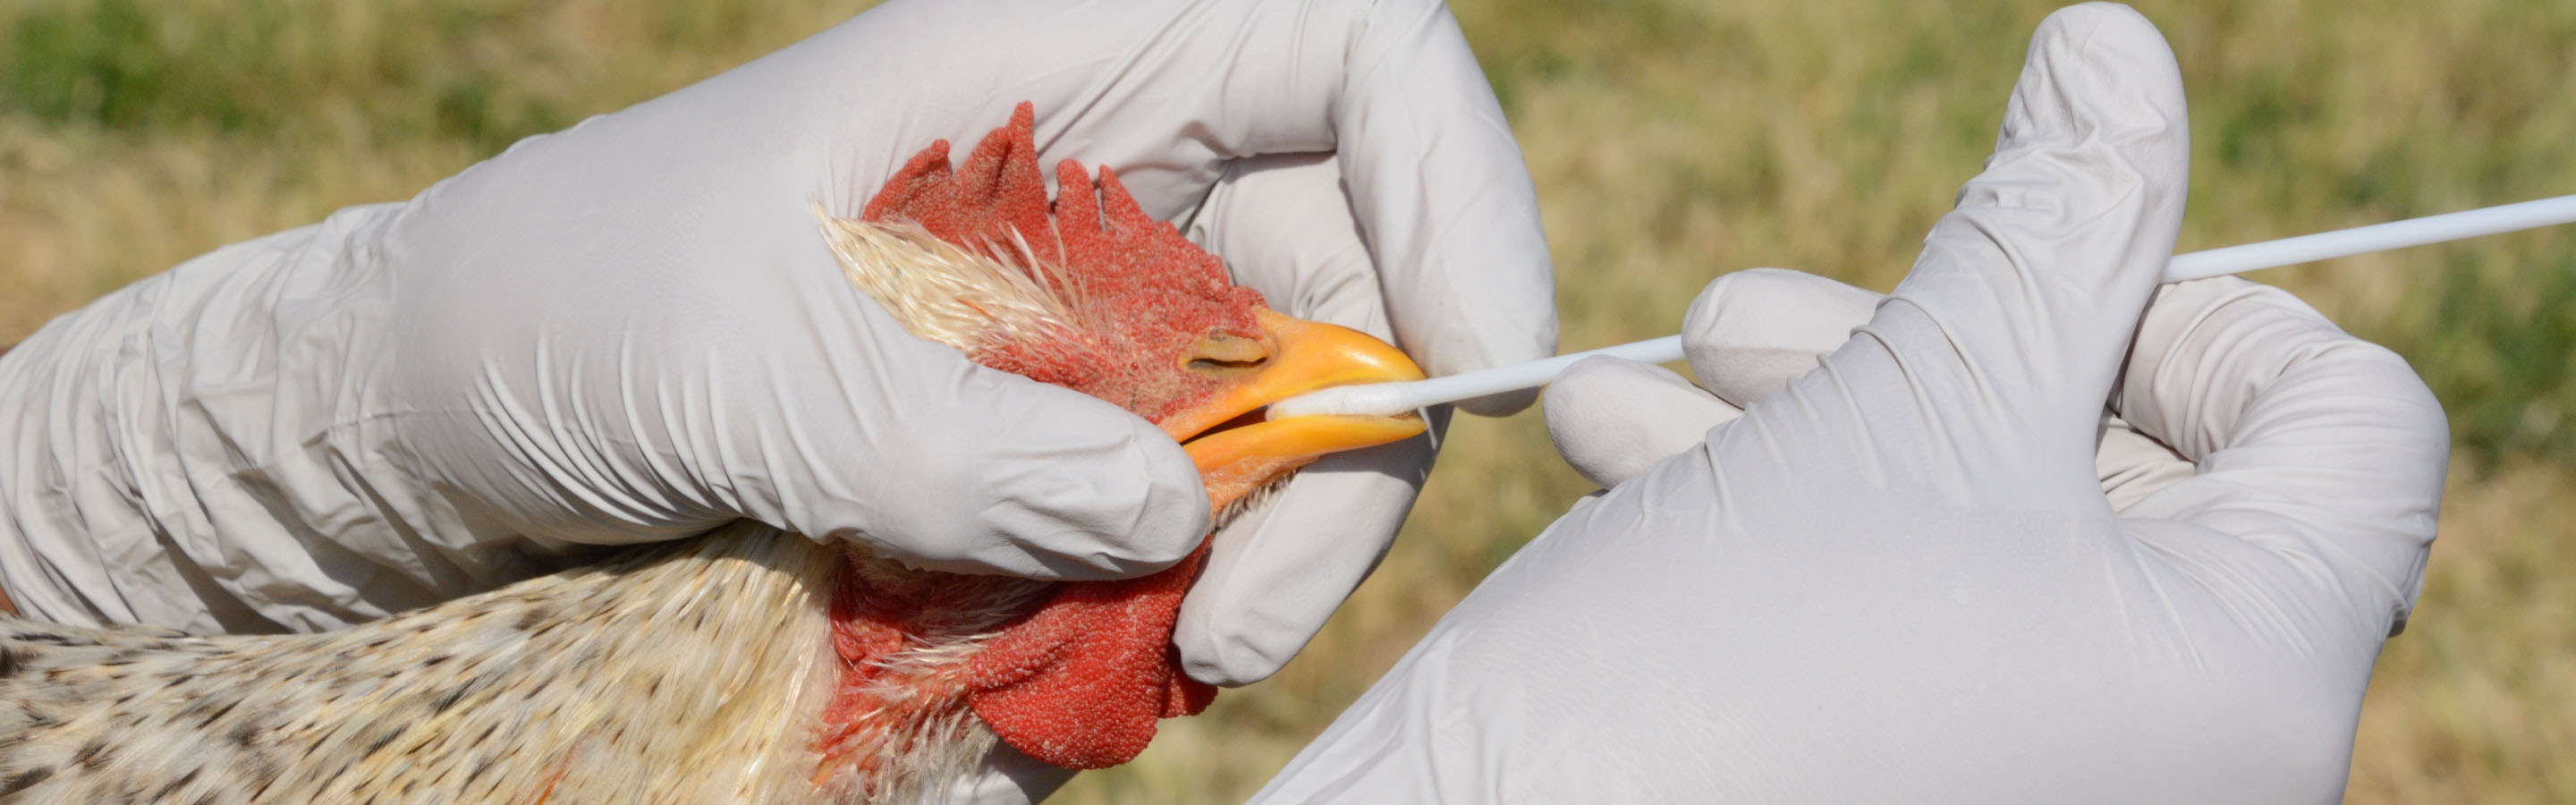 Rooster being tested for avian flu